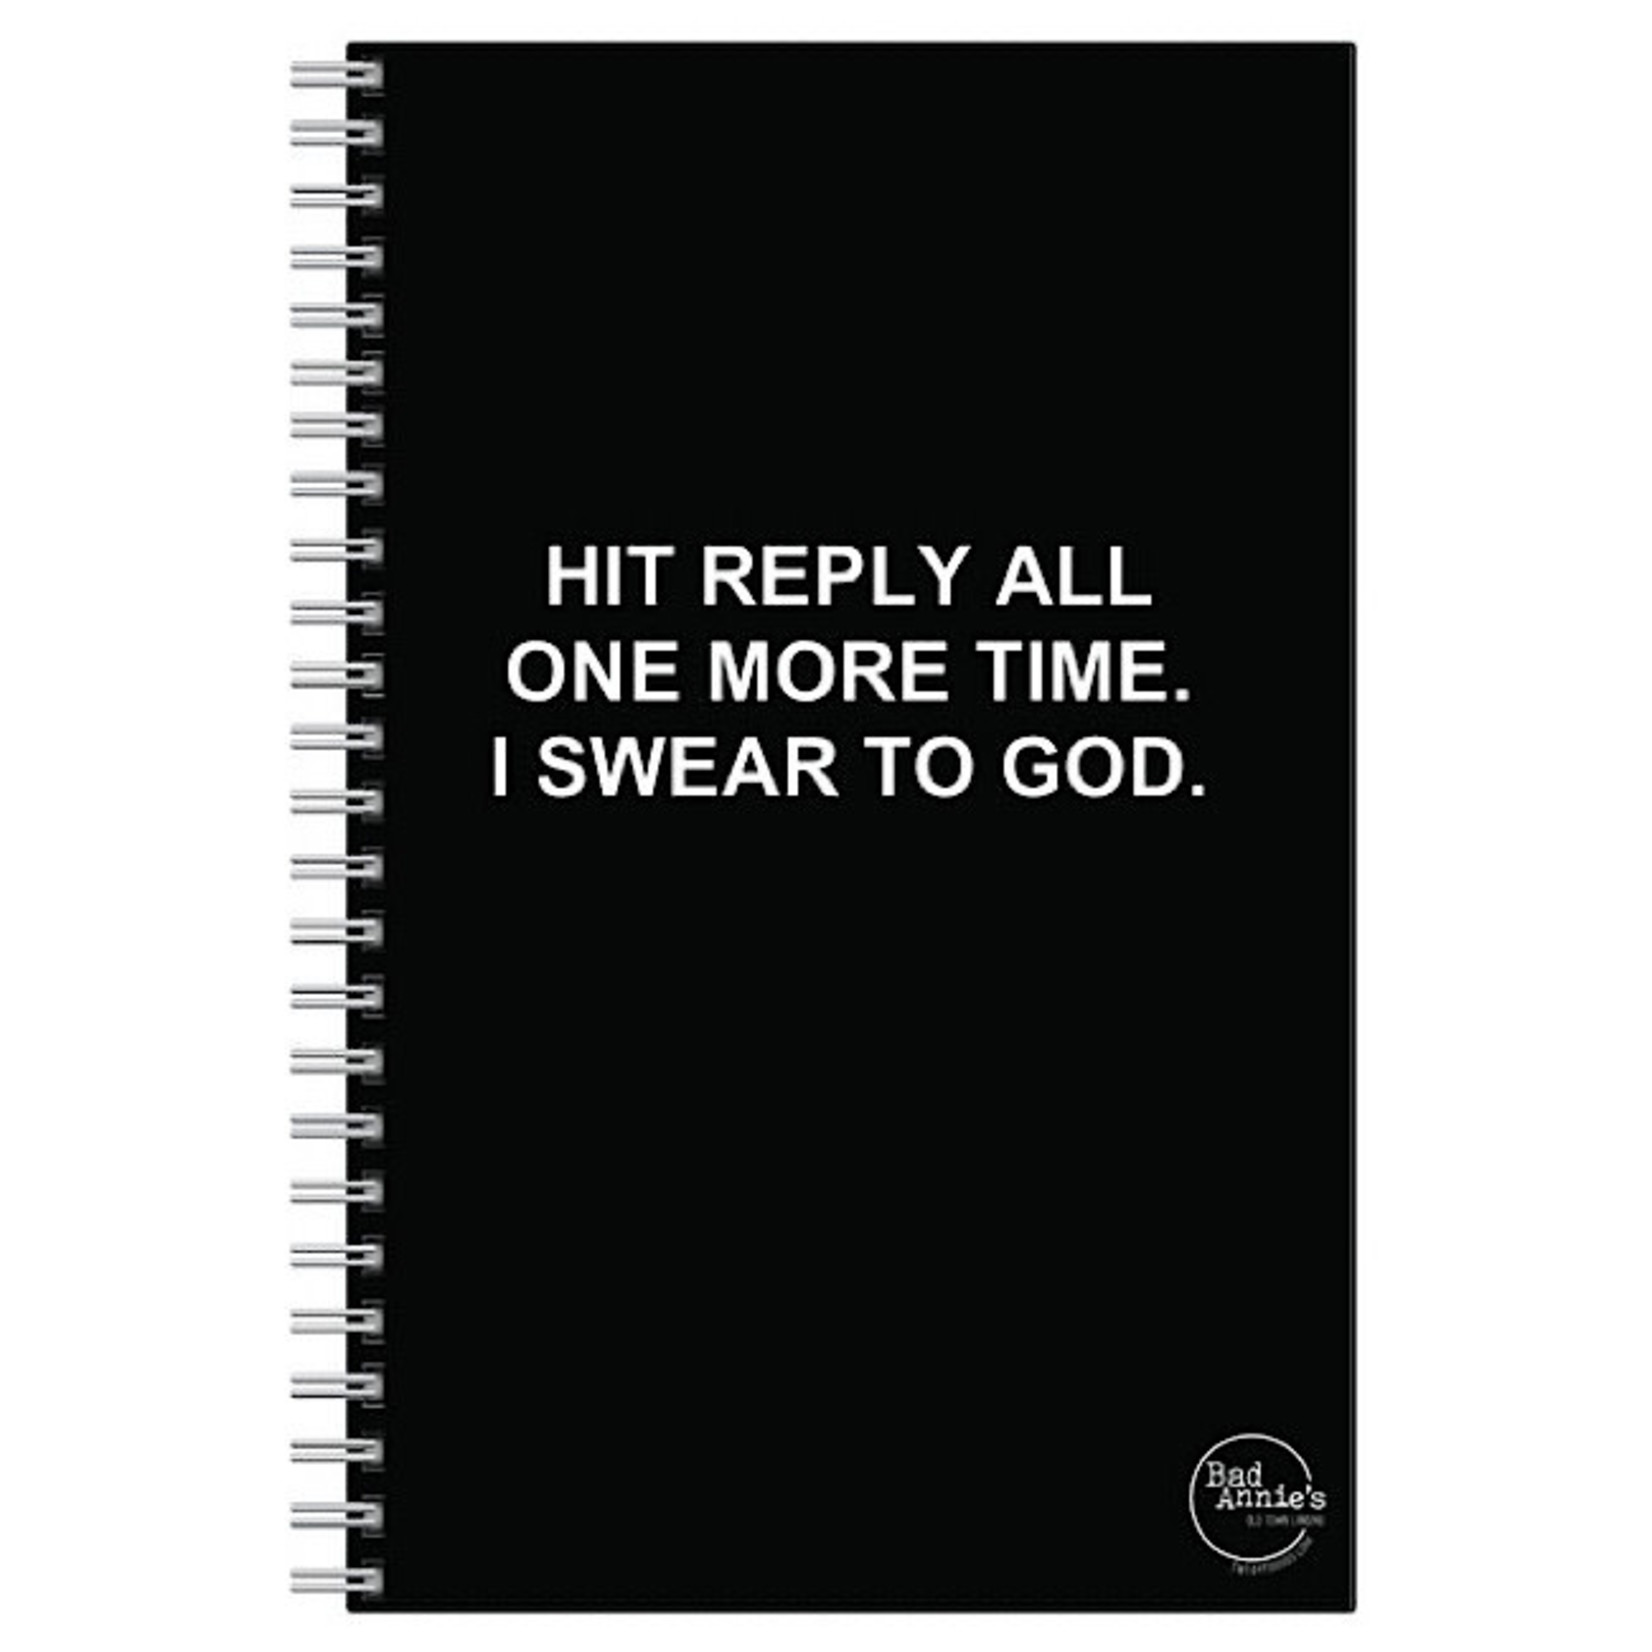 Bad Annie’s Notebook - Hit Reply All One More Time I Swear To God